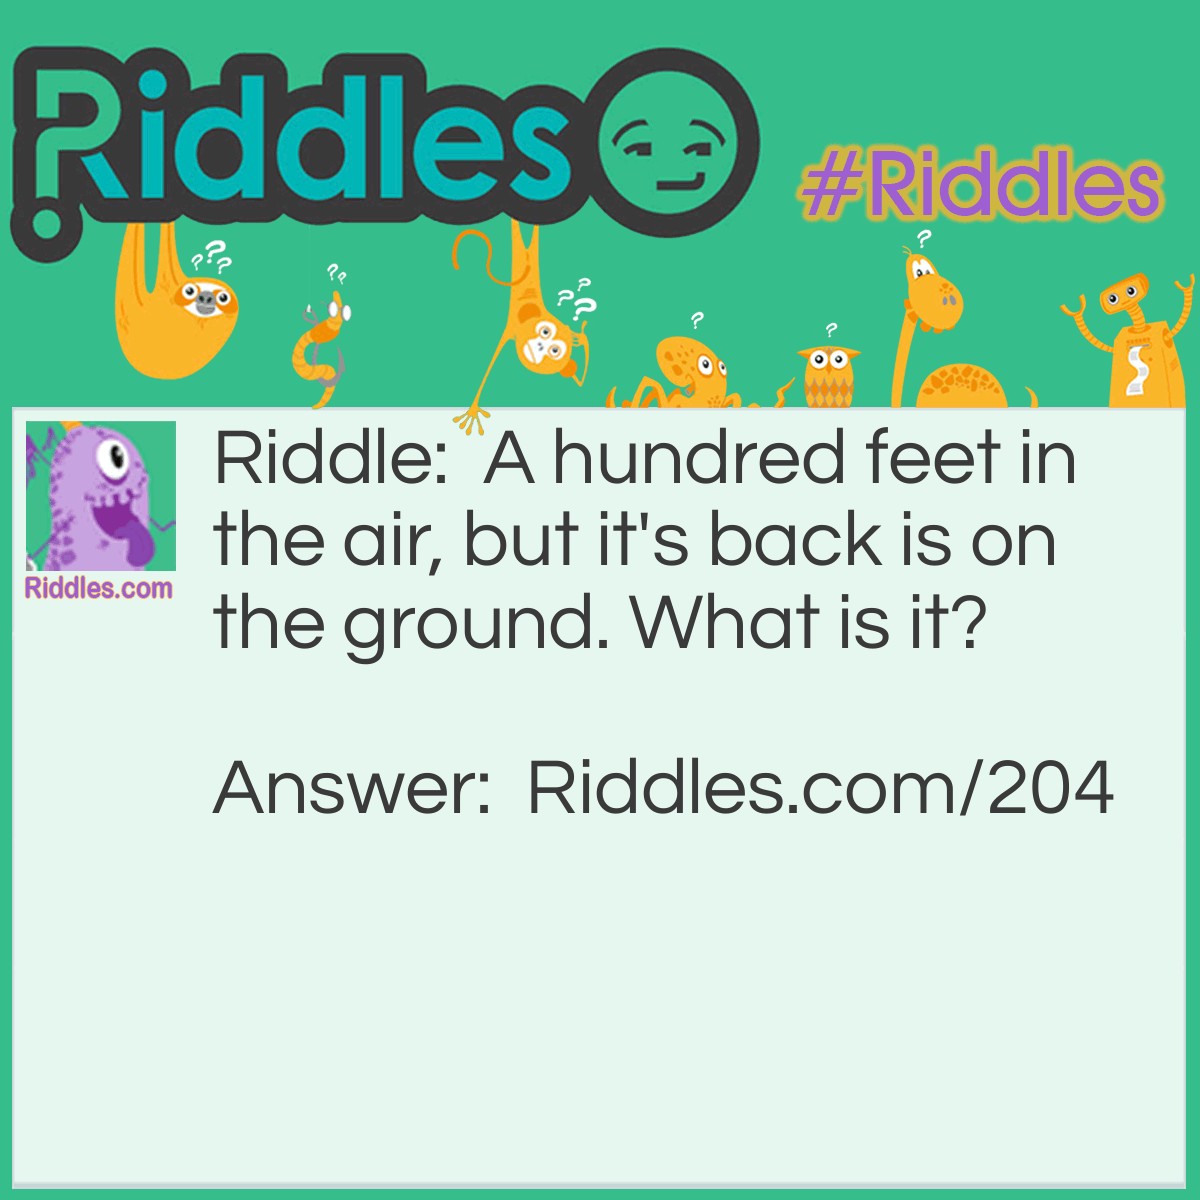 Riddle: A hundred feet in the air, but it's back is on the ground. What is it? Answer: A centipede flipped over.